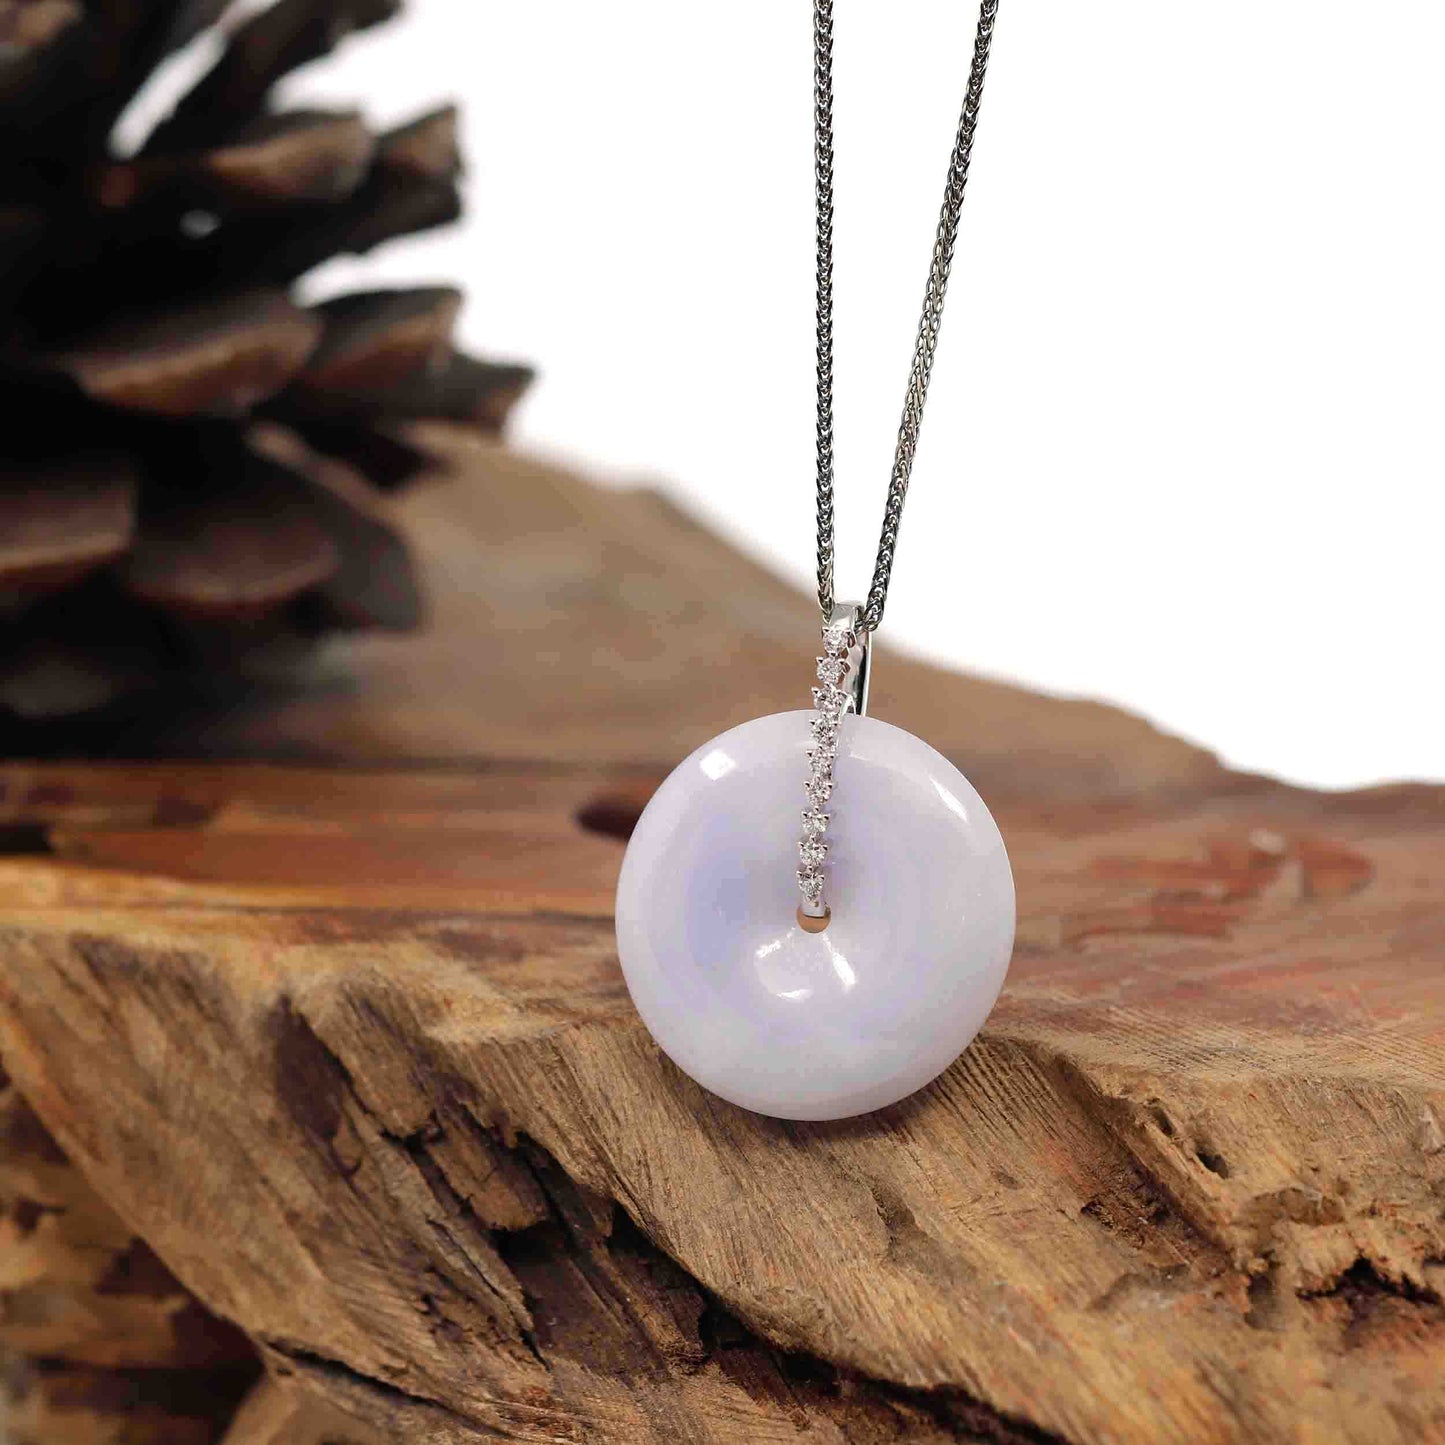 RealJade® Co. Gold Jadeite Jade Pendant Necklace Pendant Only 14K White Gold "Good Luck Button" Necklace Lavender Jadeite Jade Pendant Necklace